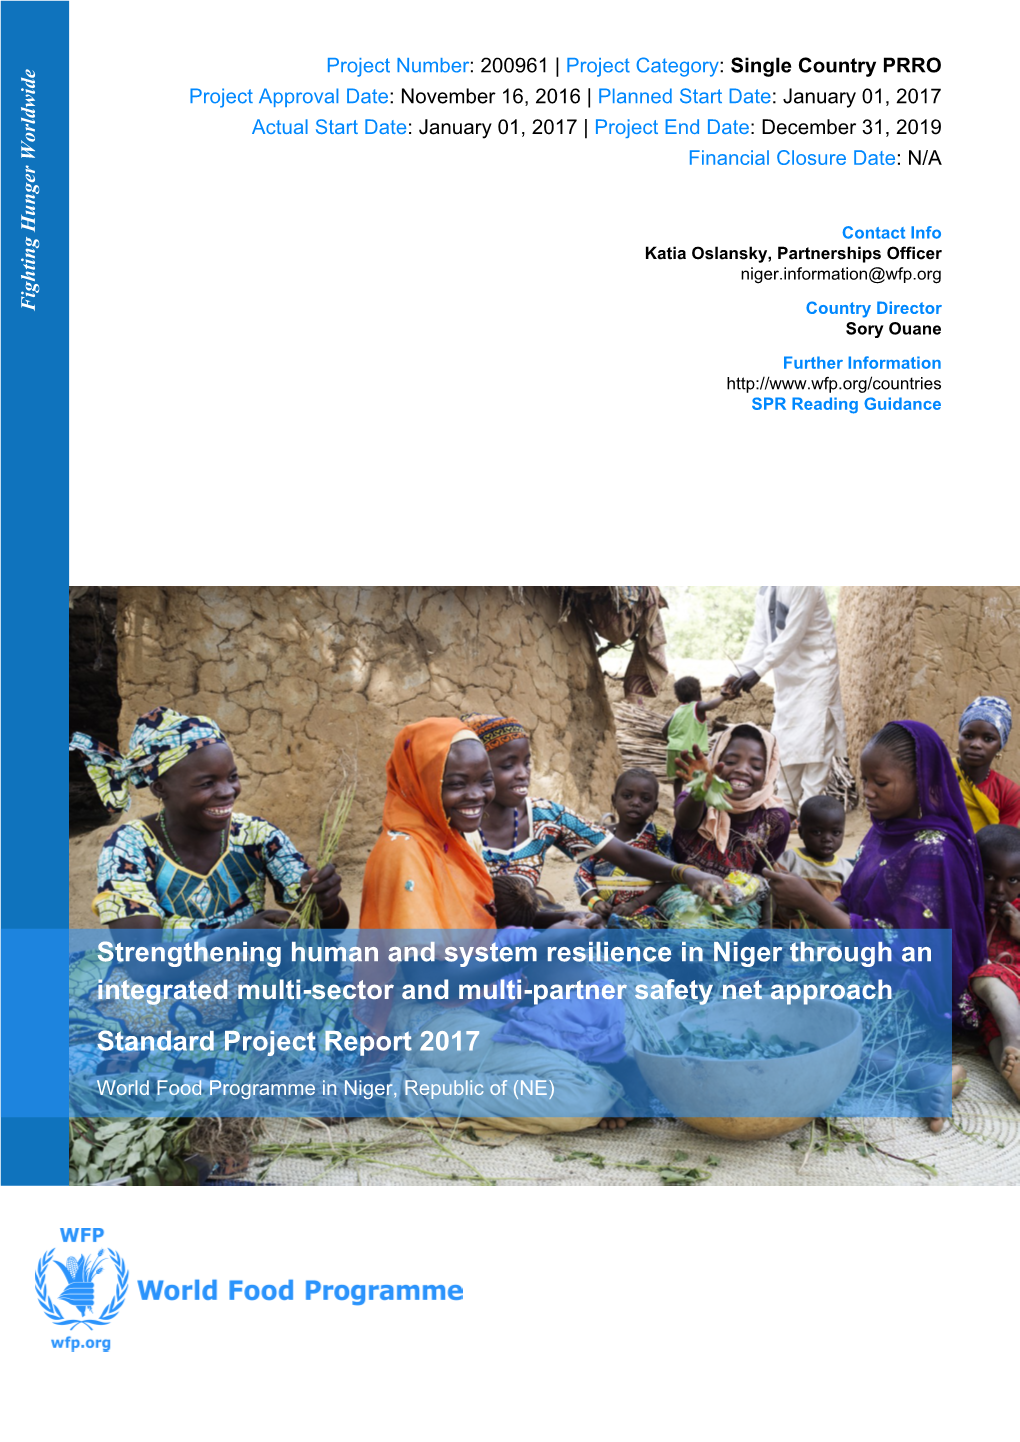 Strengthening Human and System Resilience in Niger Through An